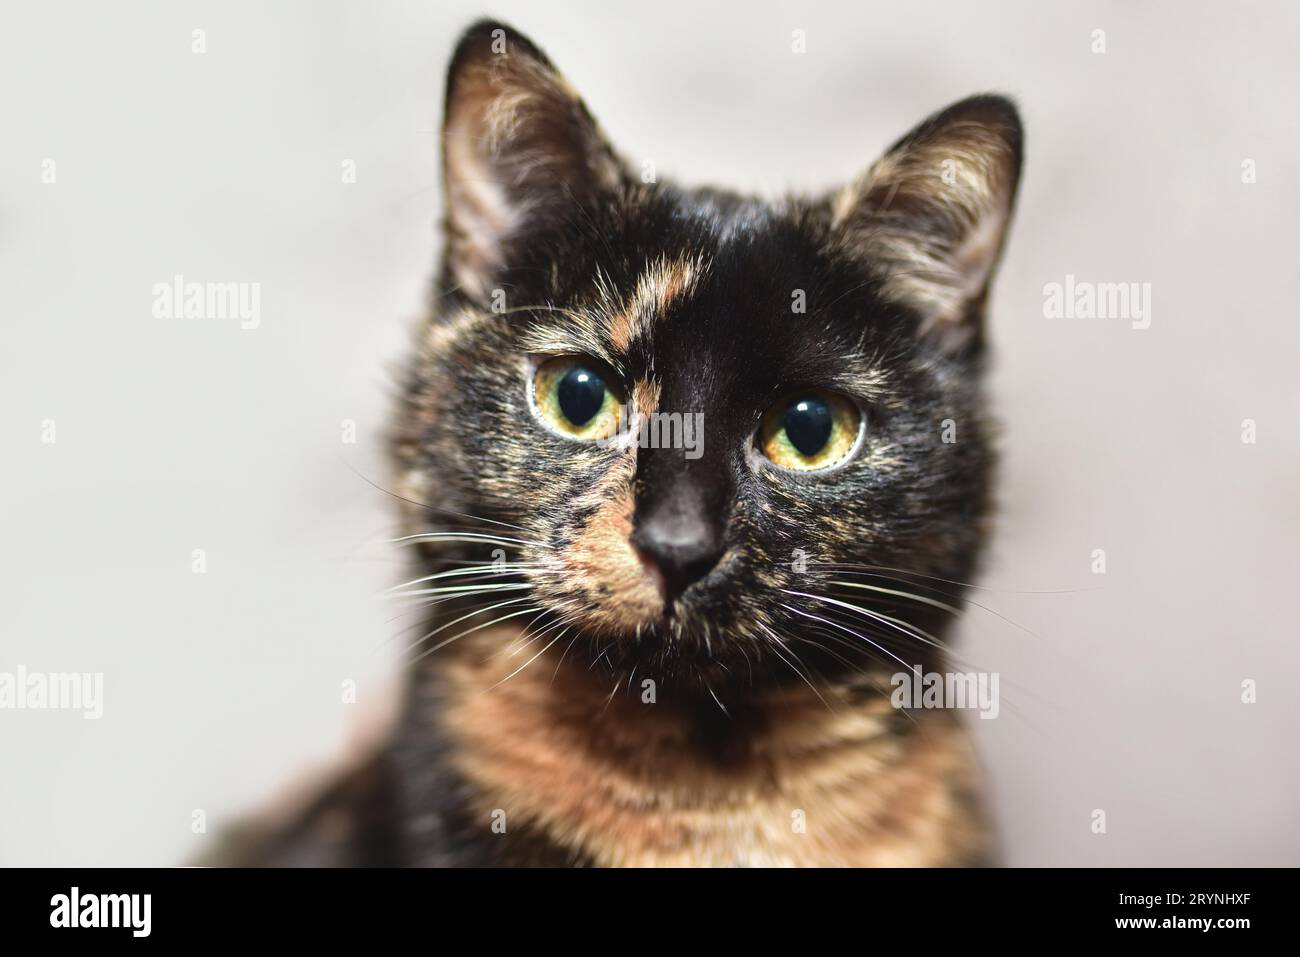 A cute portrait of a smooth-haired tortoiseshell cat with orange-green eyes. Stock Photo